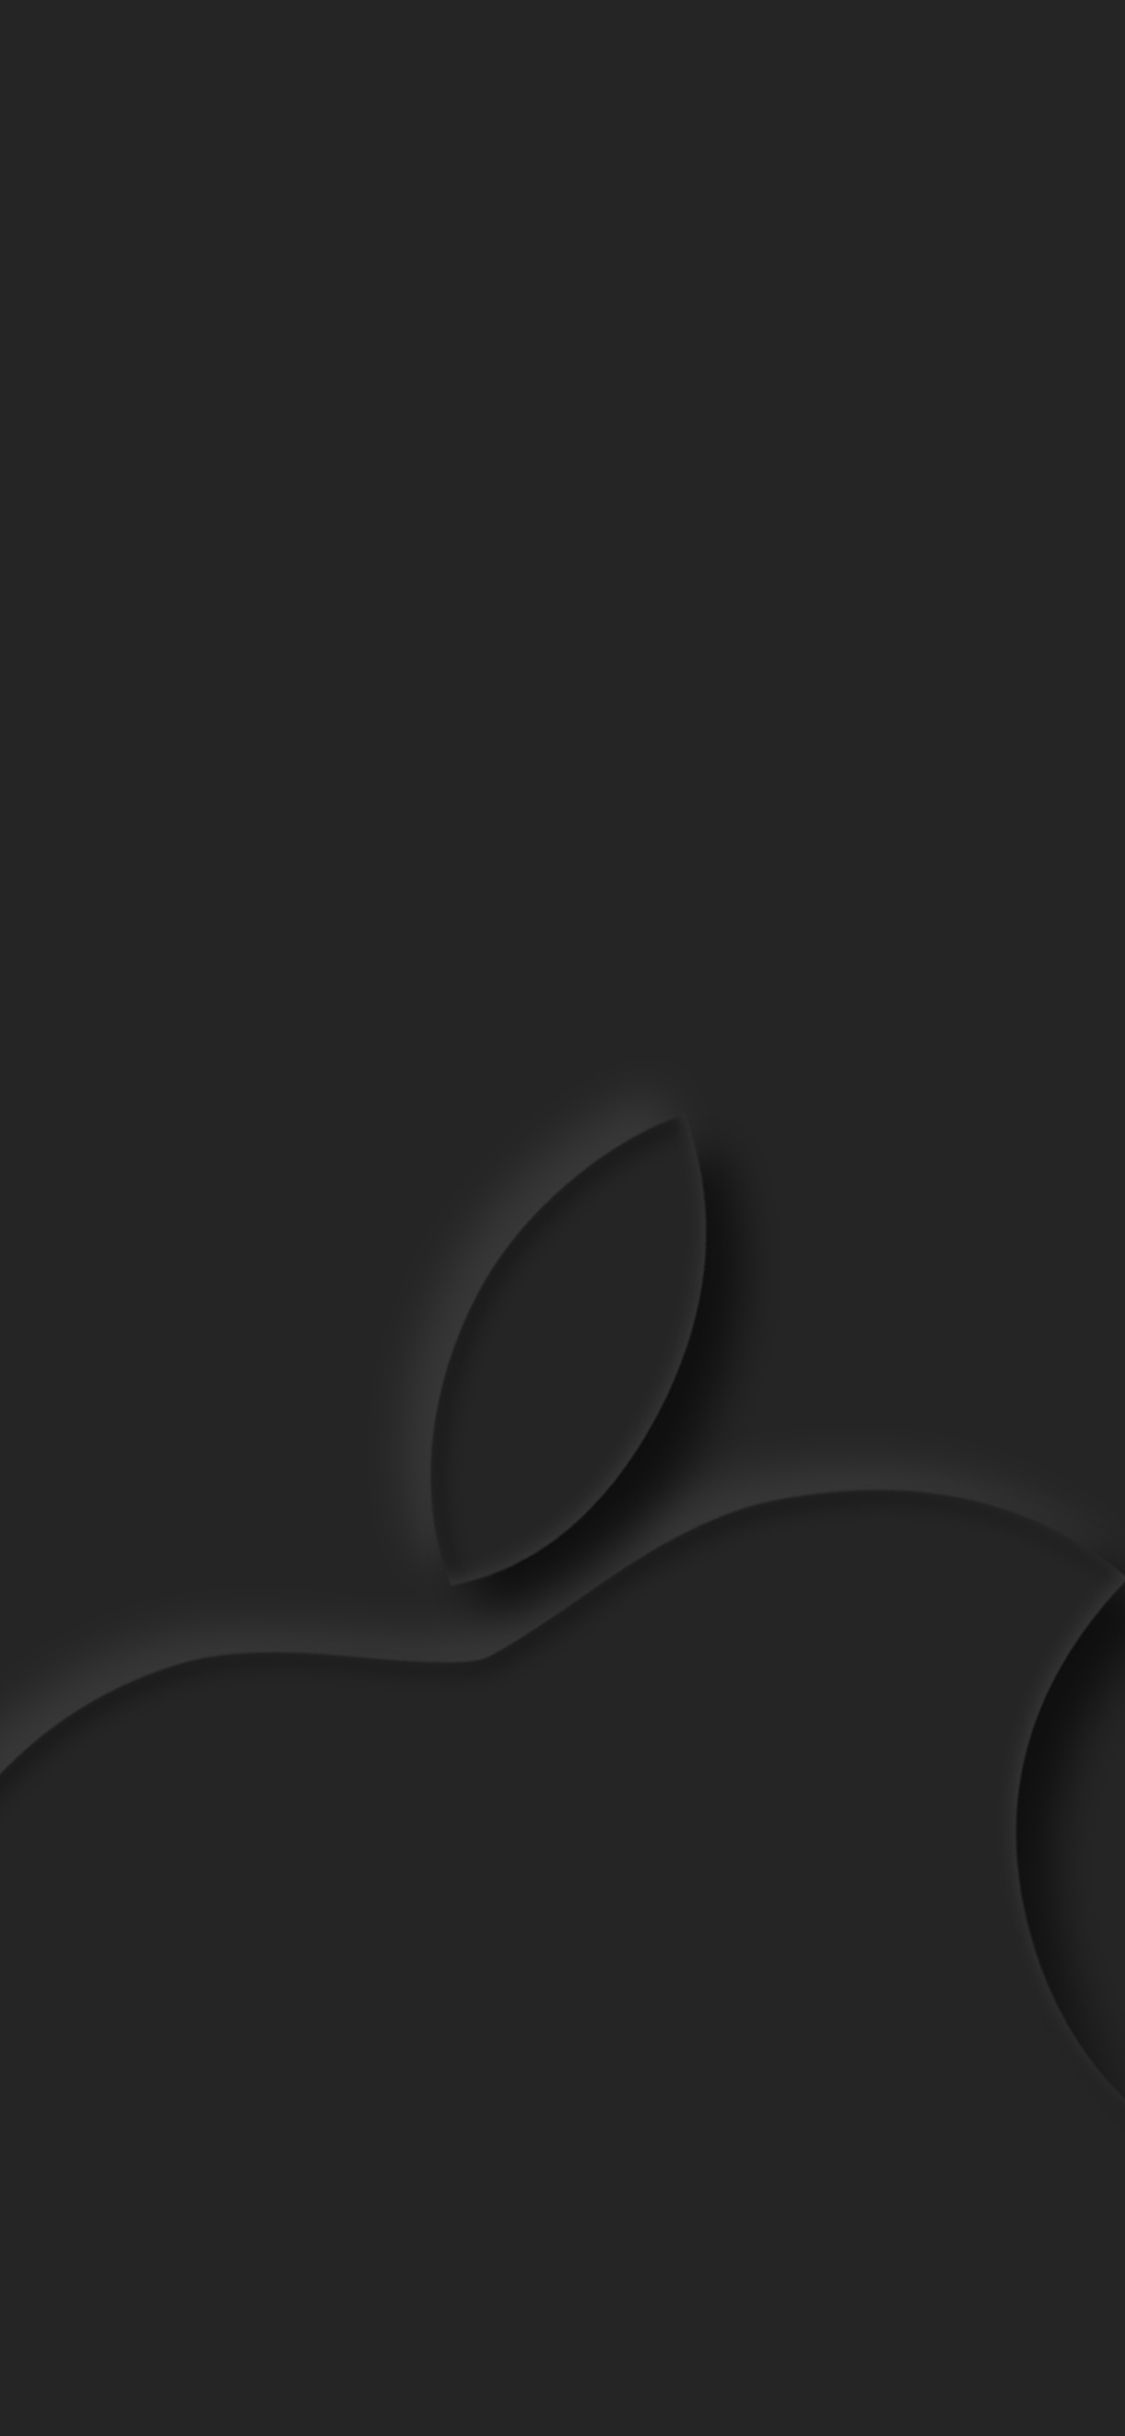 Apple Logo Dark Grey 4k iPhone XS, iPhone iPhone X HD 4k Wallpaper, Image, Background, Photo and Picture